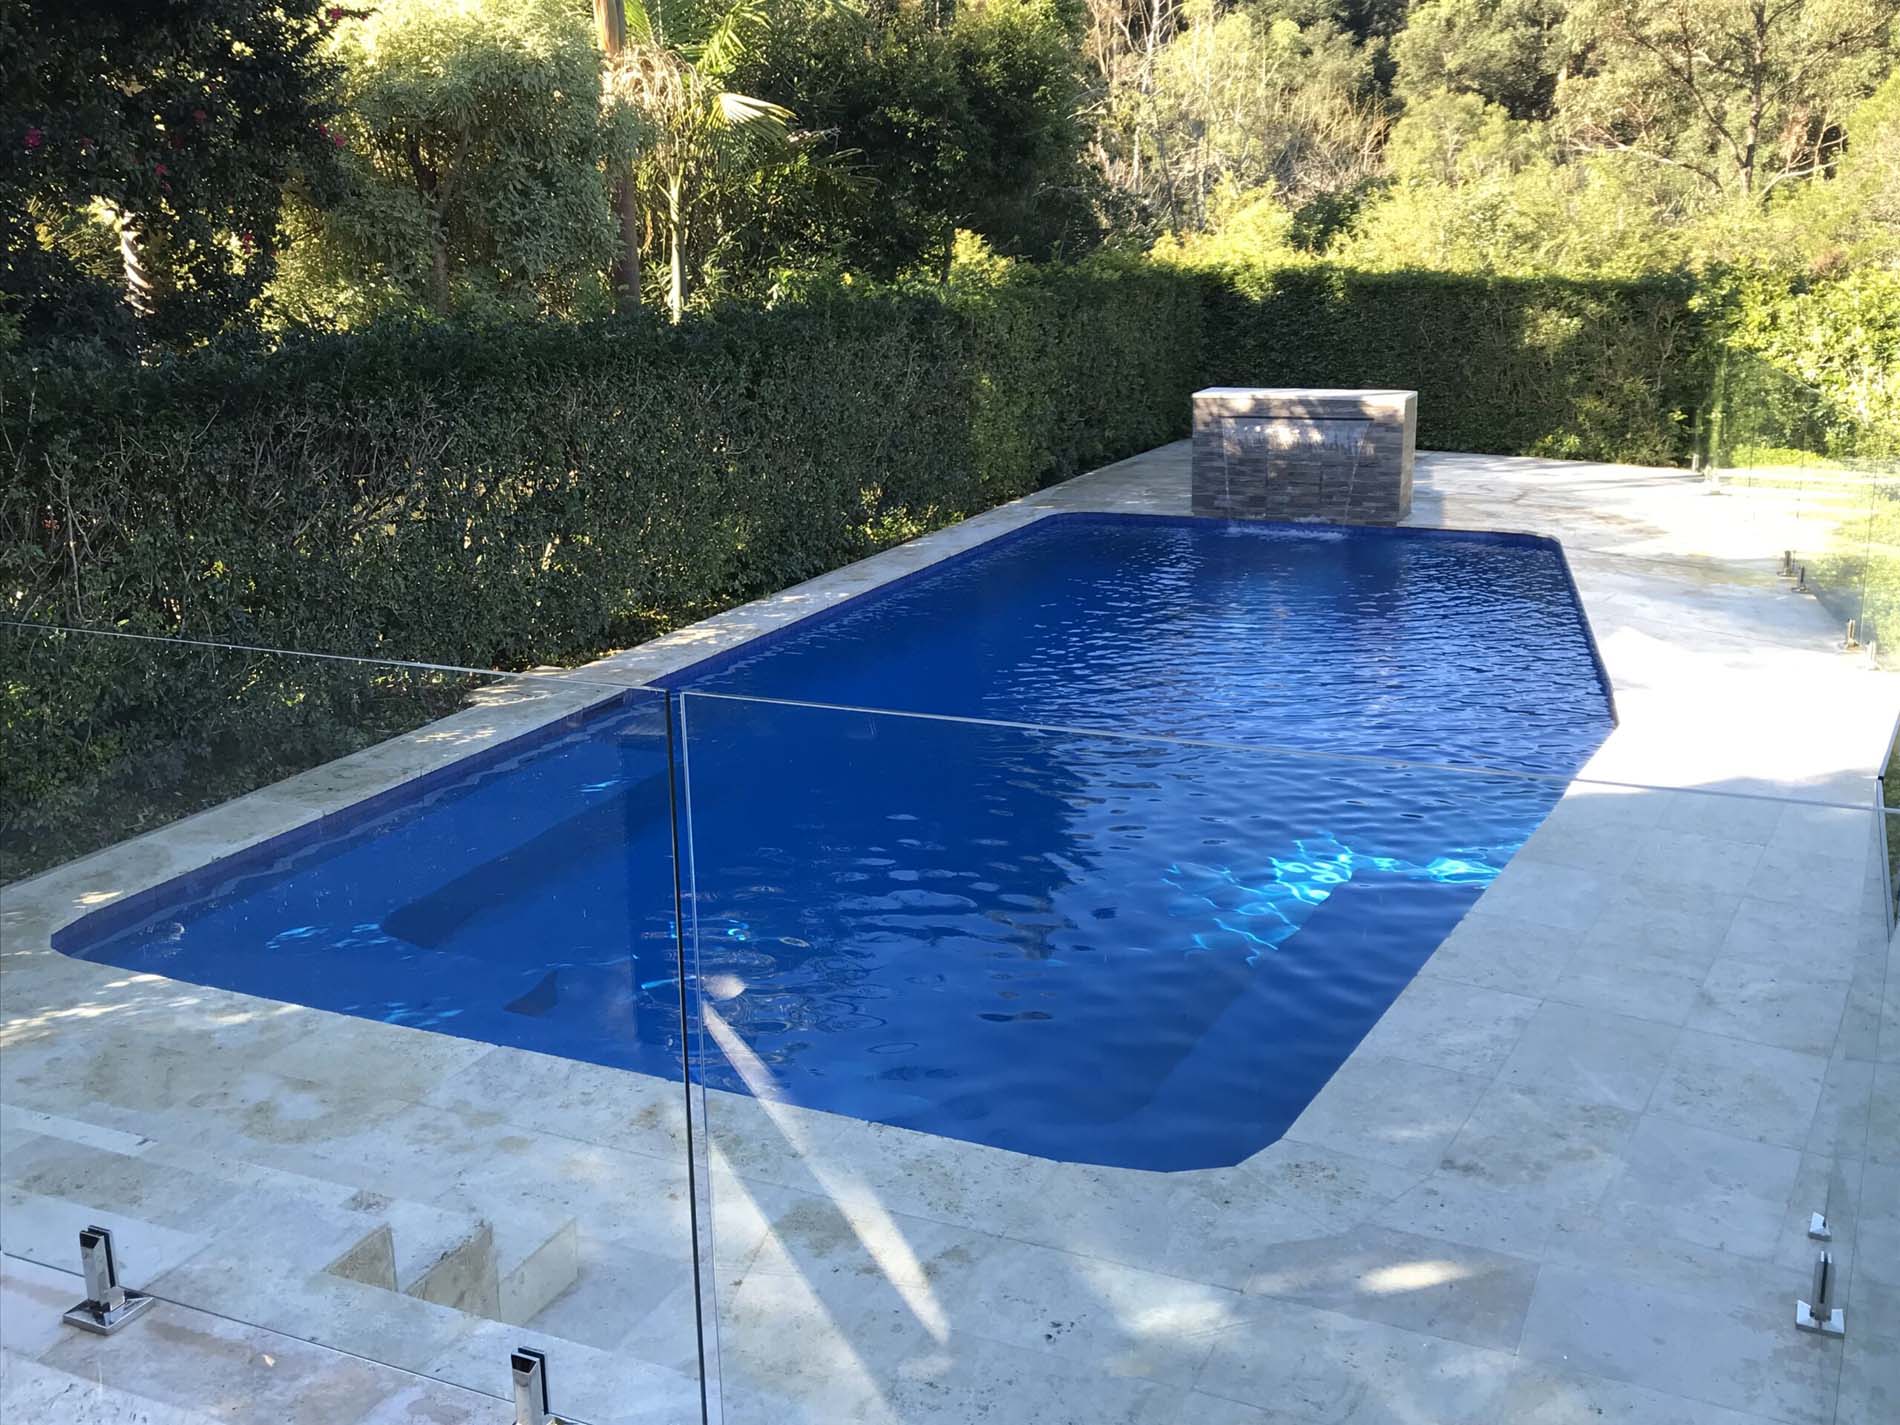 Domestic pool painted with Luxapool Epoxy in Devonport colour